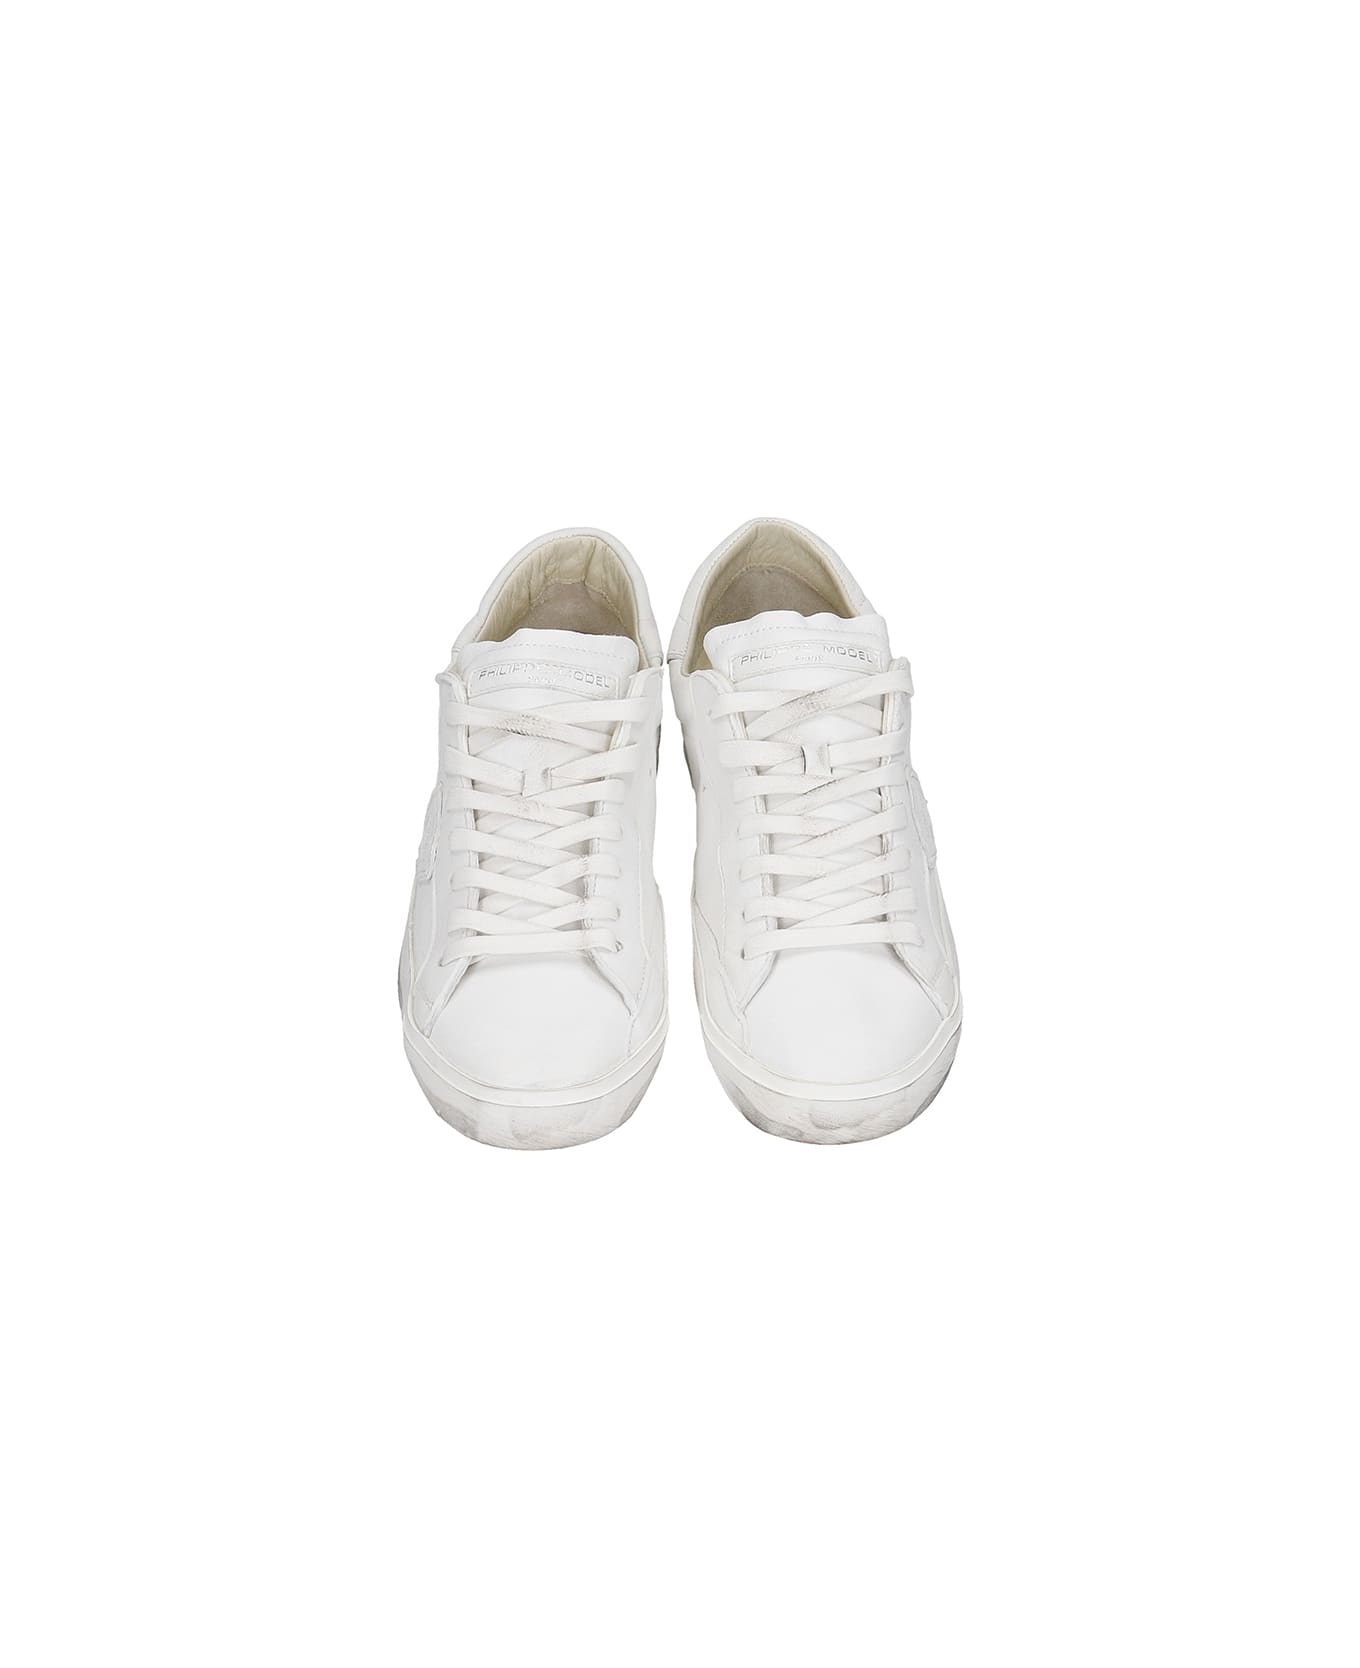 Philippe Model Prsx L Sneakers In White Leather - WHITE スニーカー